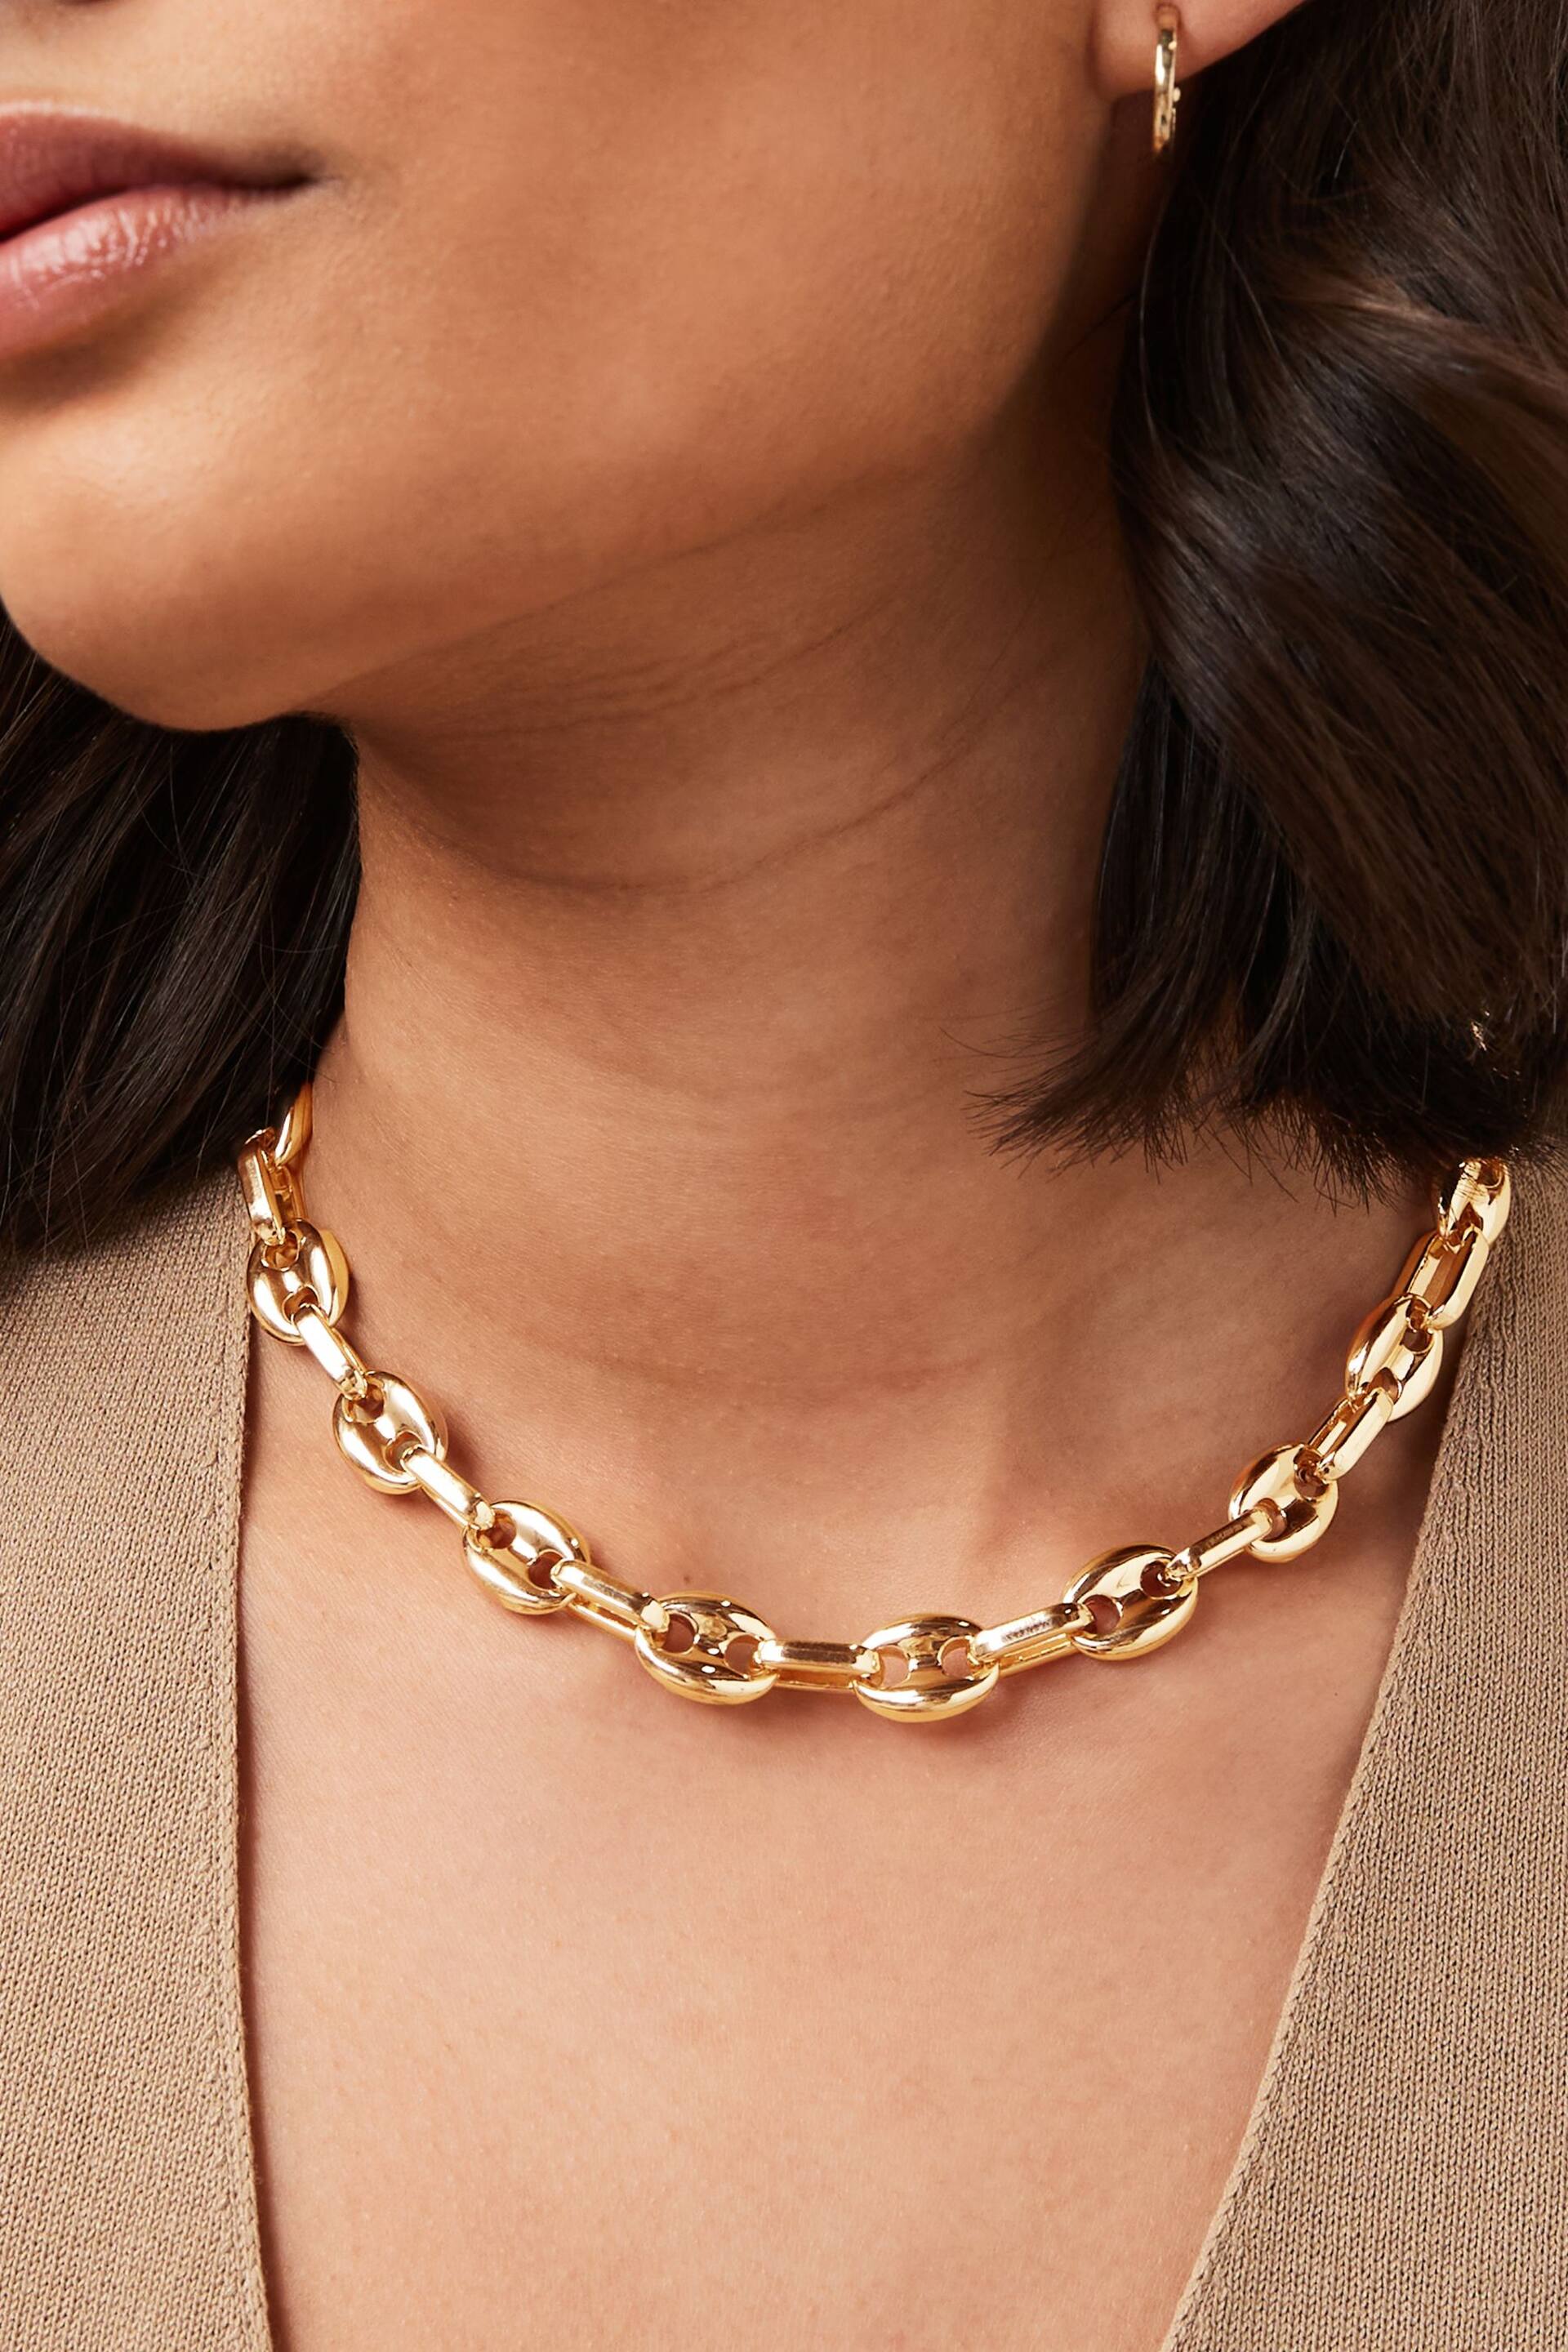 Gold Tone Chain Link Choker Necklace - Image 1 of 4